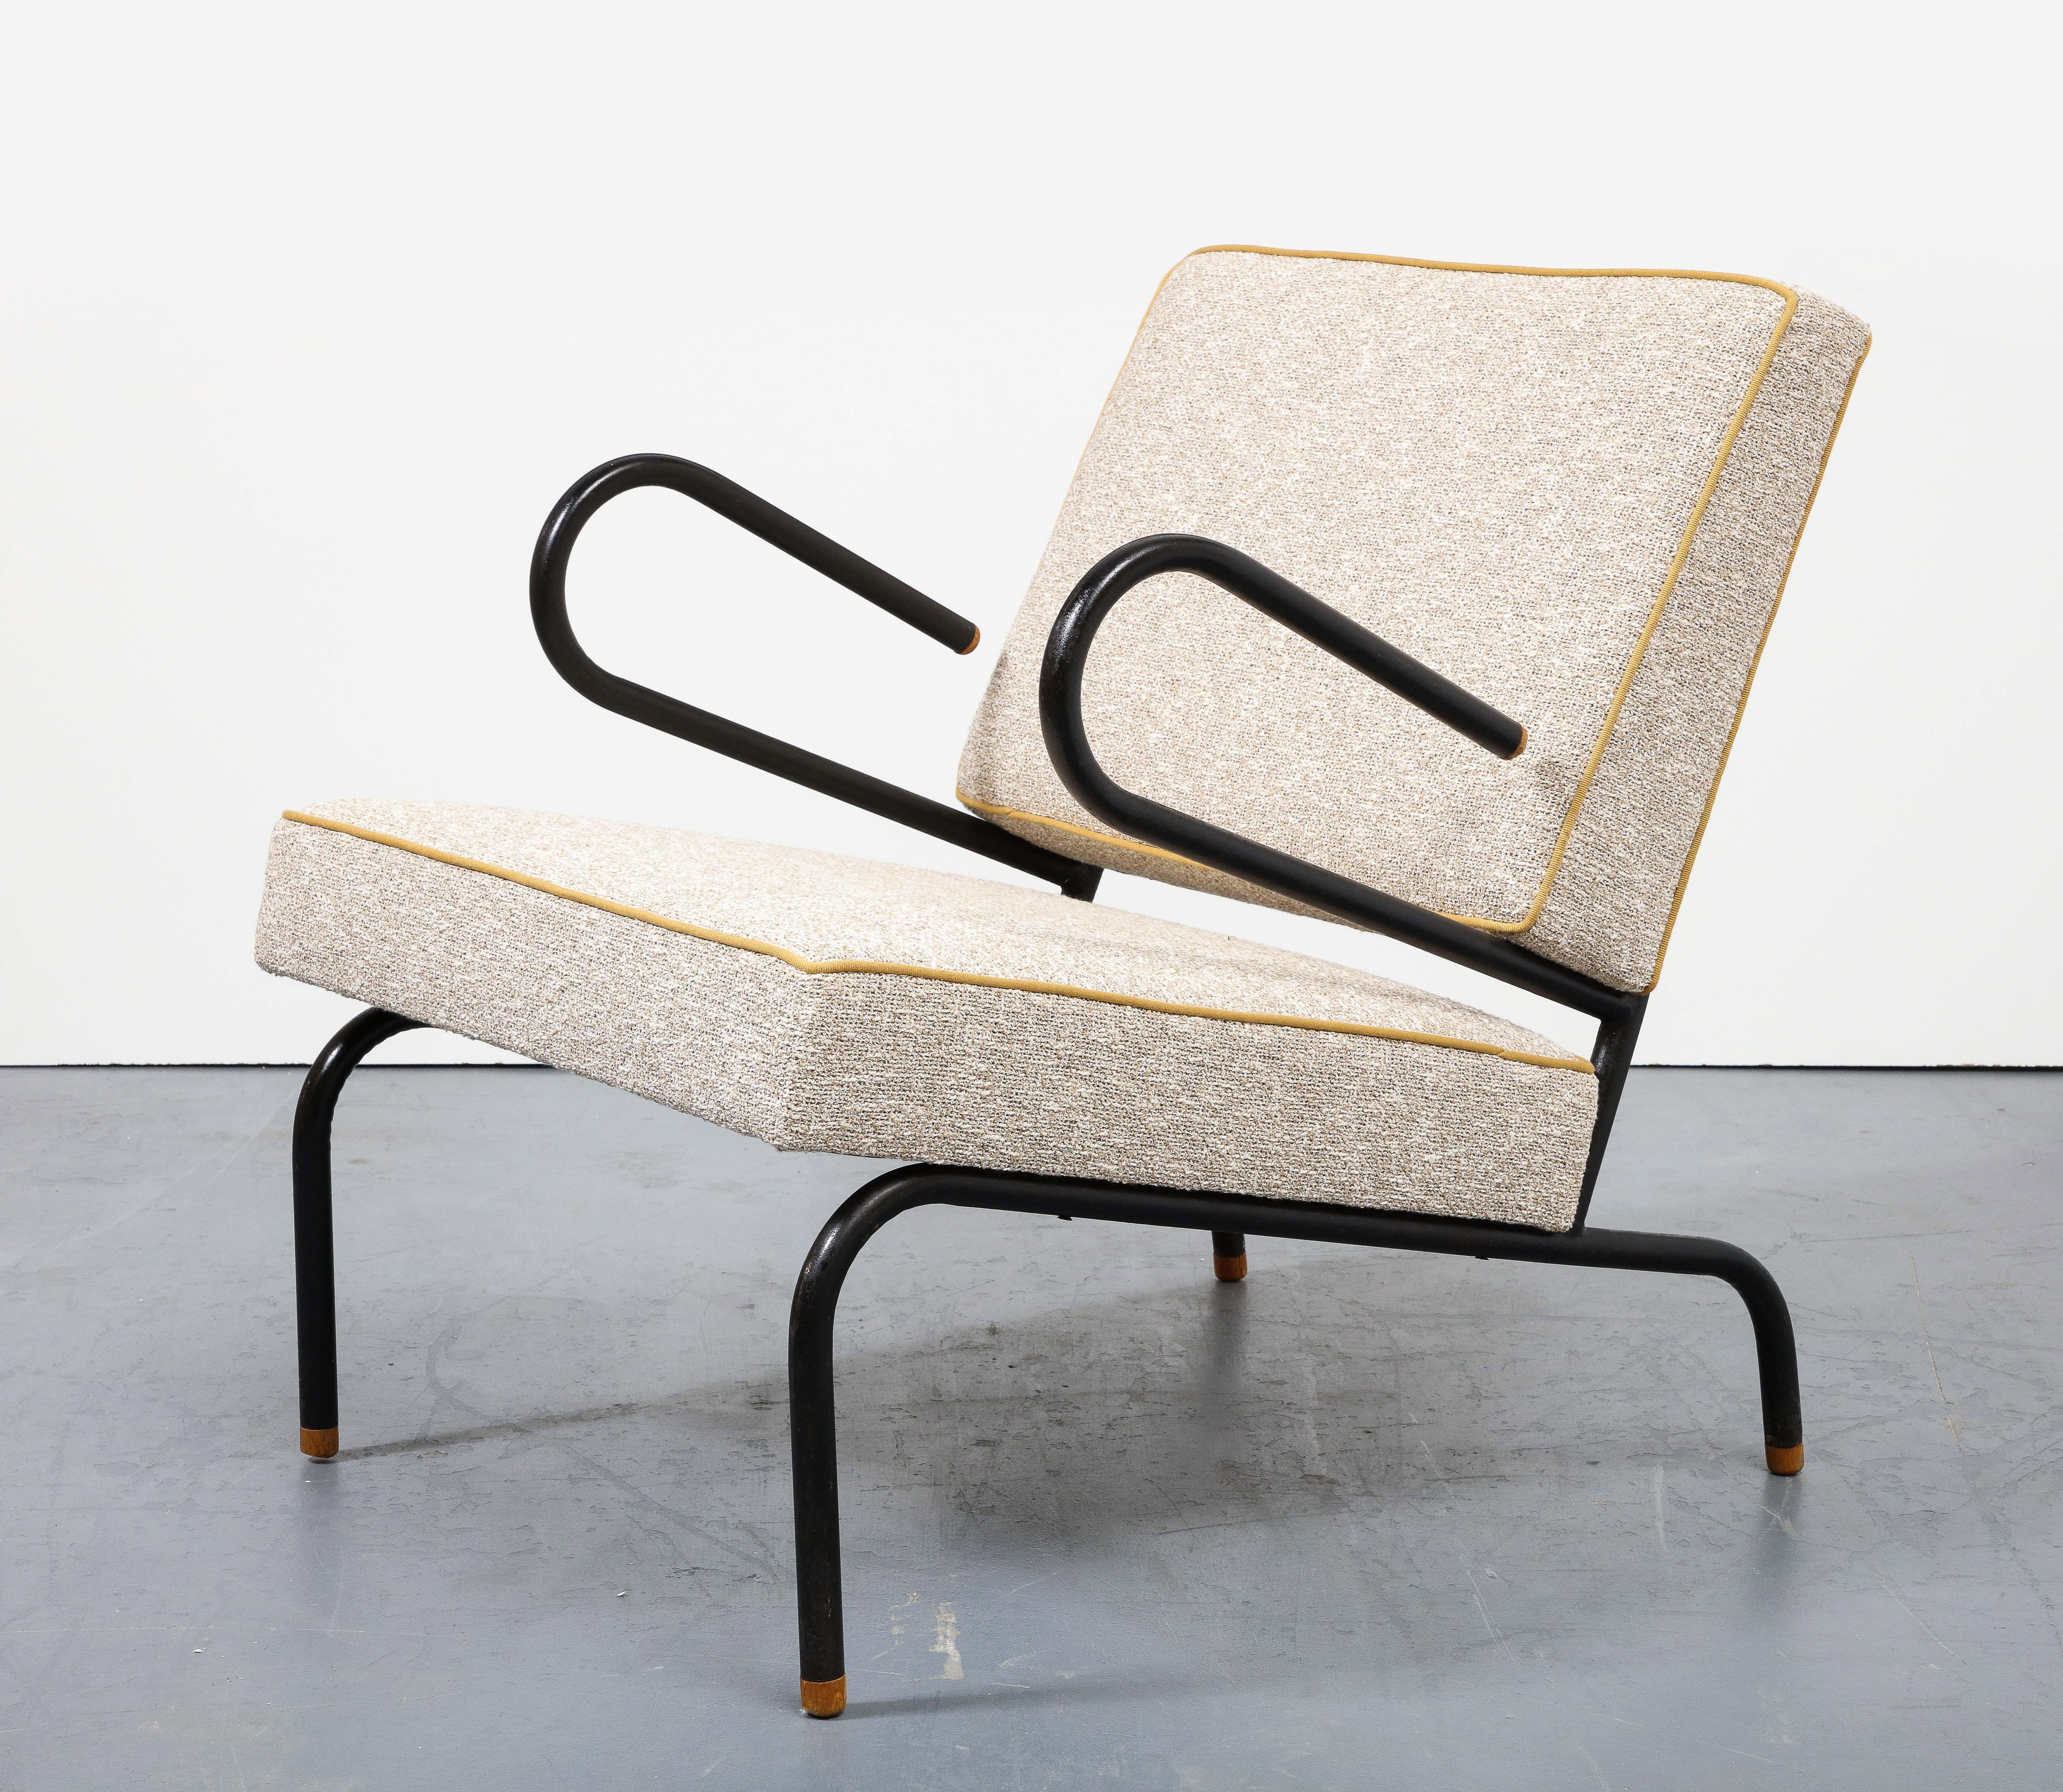 Bent Steel Lounge Chair by Jacques Hitier for Tubauto, France, c. 1955 For Sale 4